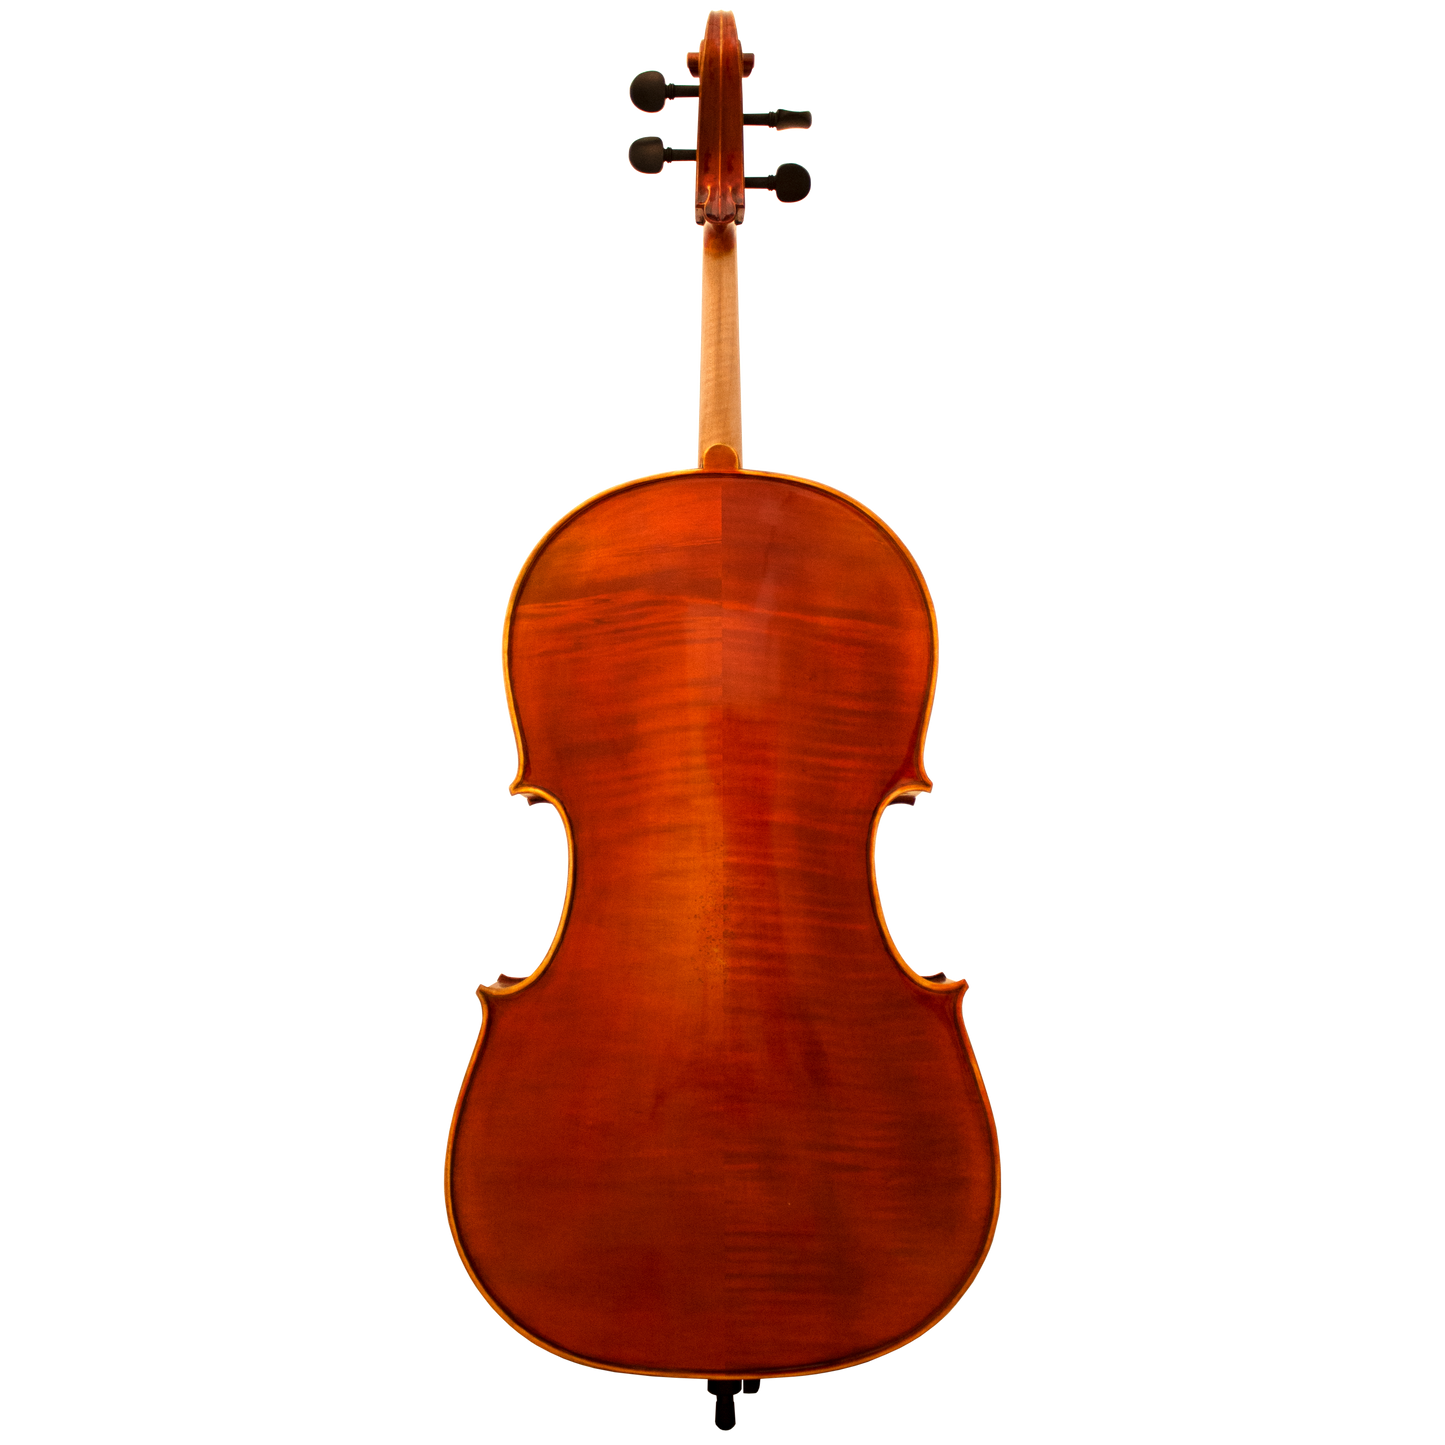 Ruby Maple Leaf Advanced Cello with Bag String Power - Violin Shop